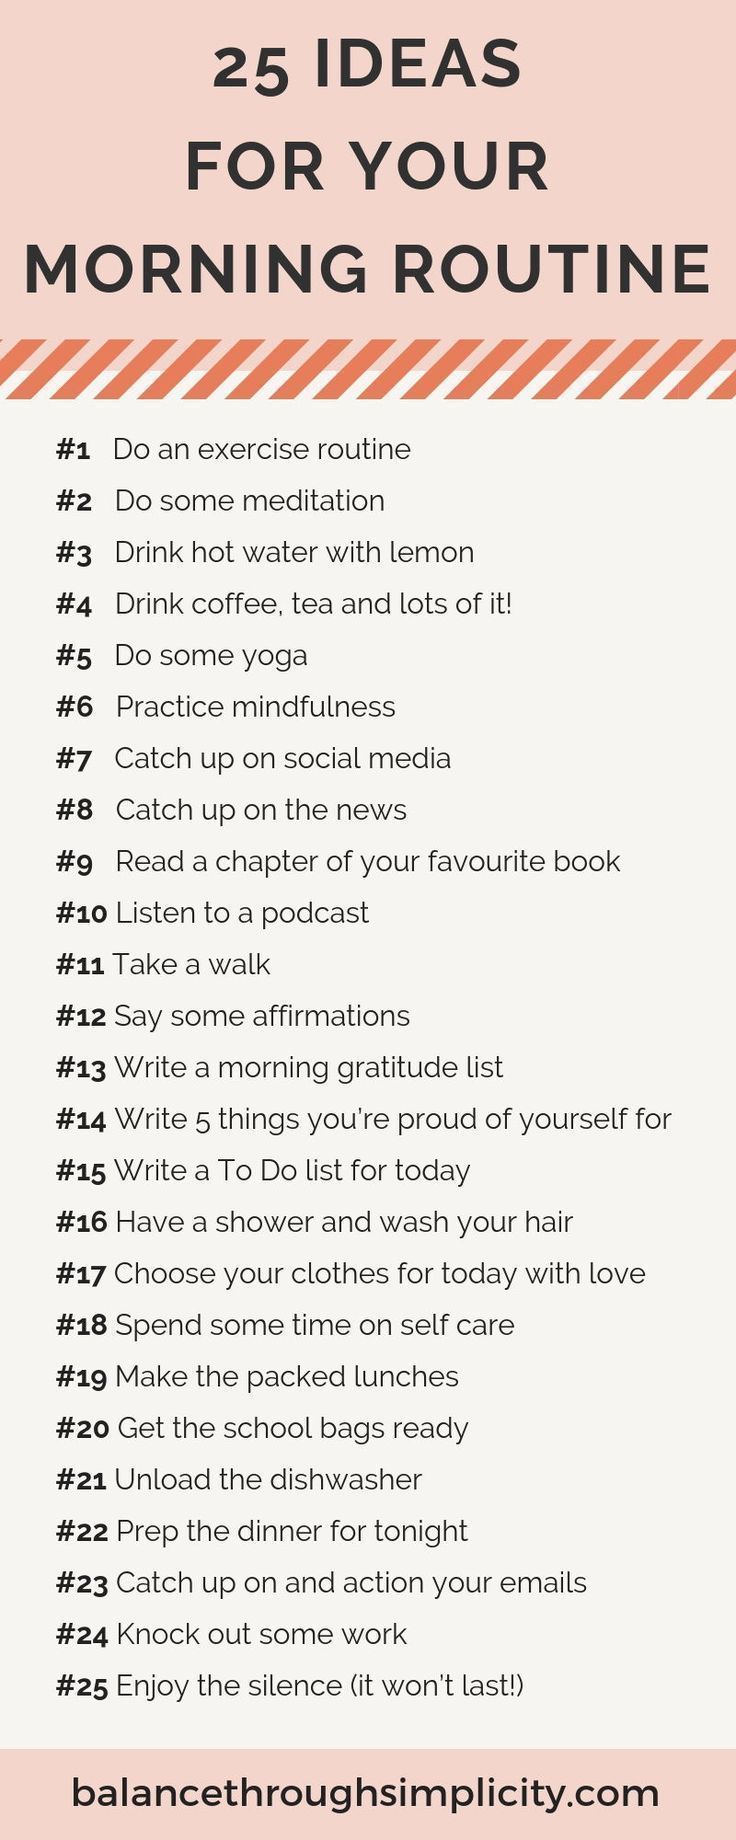 Morning Rituals - Morning Rituals -   18 beauty Routines checklist ideas